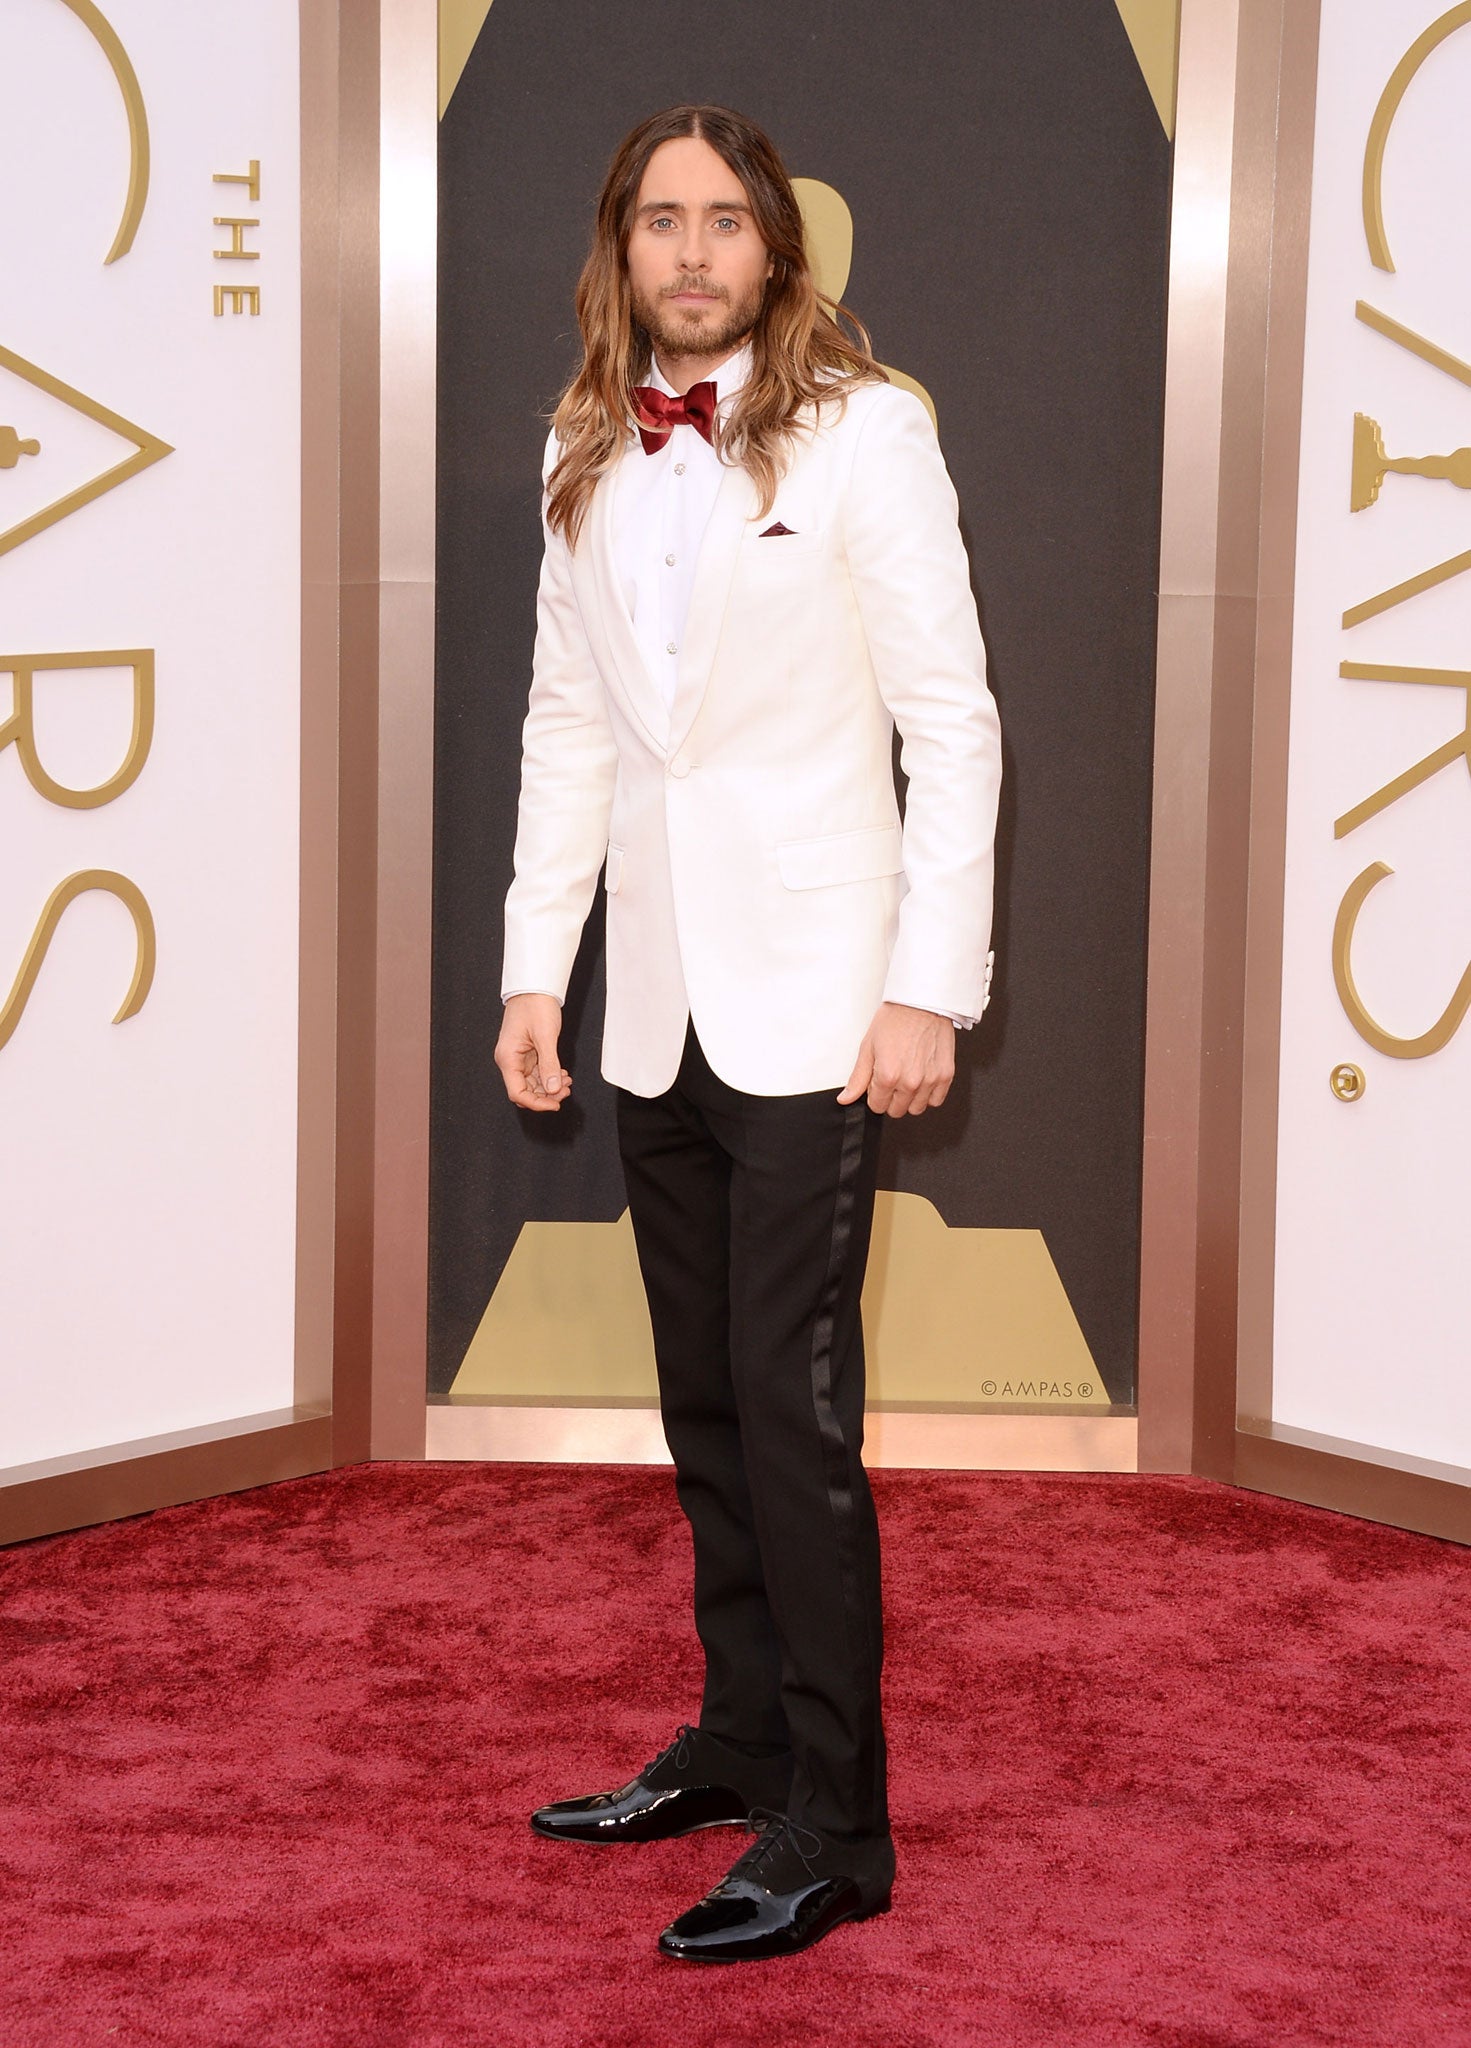 Positively charming: Jared Leto arrives at the Oscars